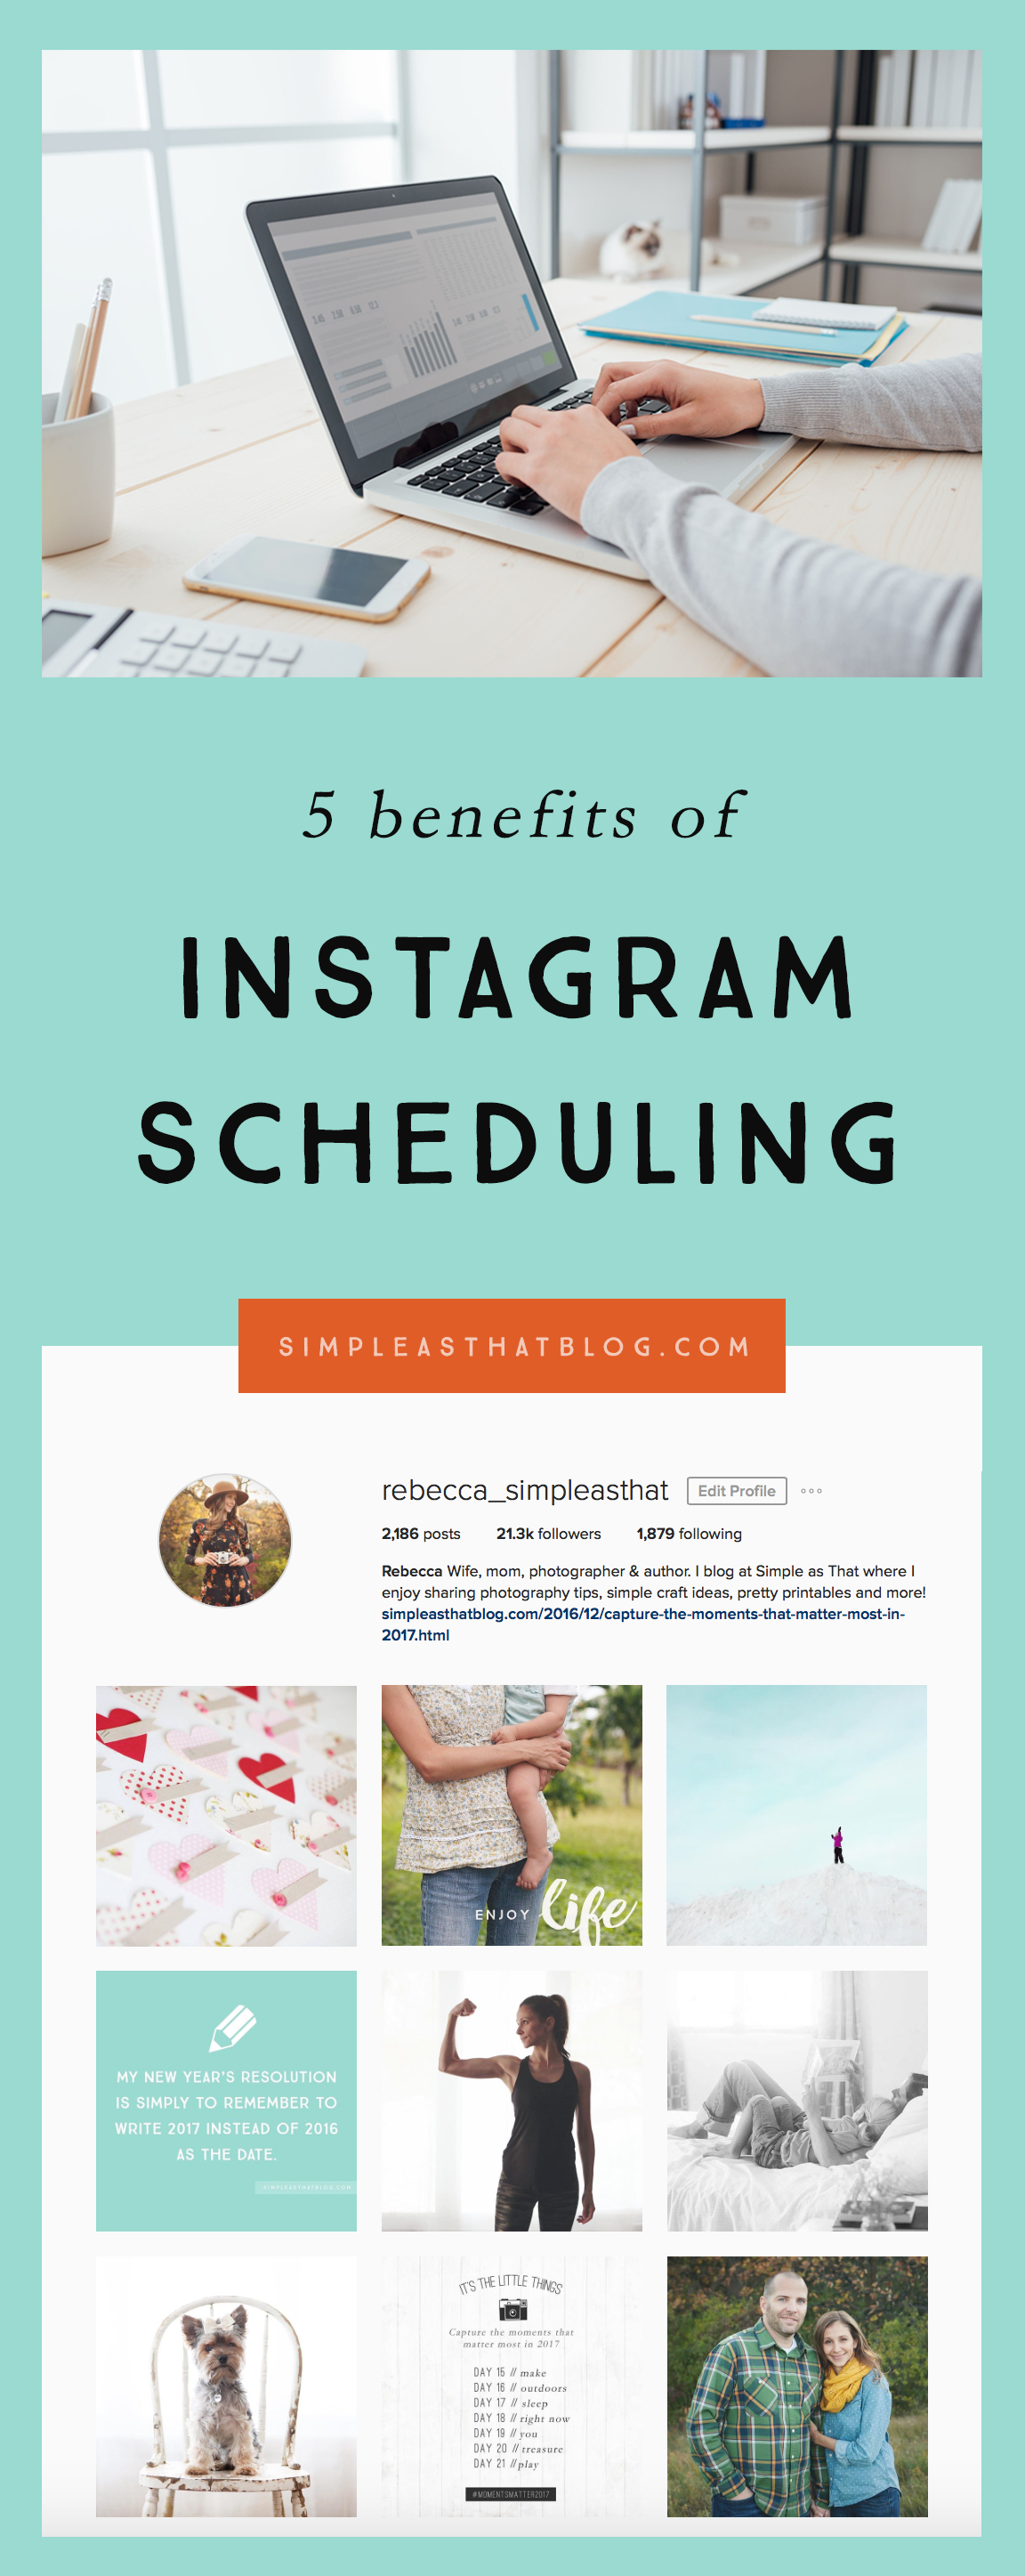 5 Benefits of Scheduling Instagram Posts // Utilizing a scheduler for social media posting has been a small, but pivotal way I've been able to save time and energy when it comes to blogging.